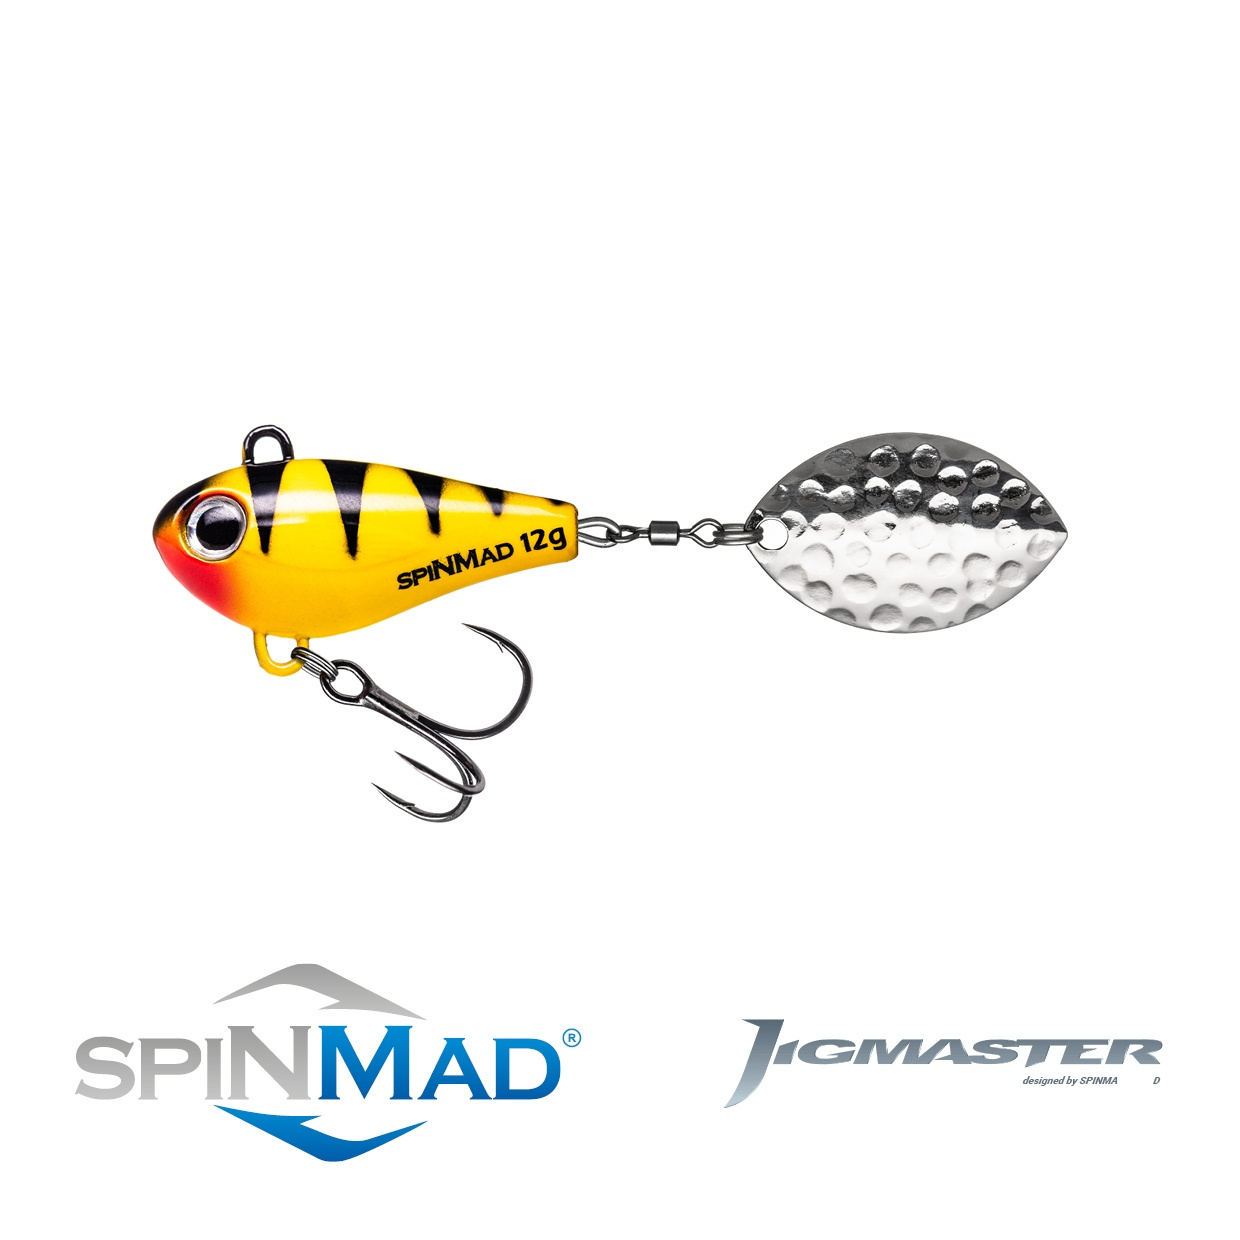 Spinmad Jigmaster 12g - 1411